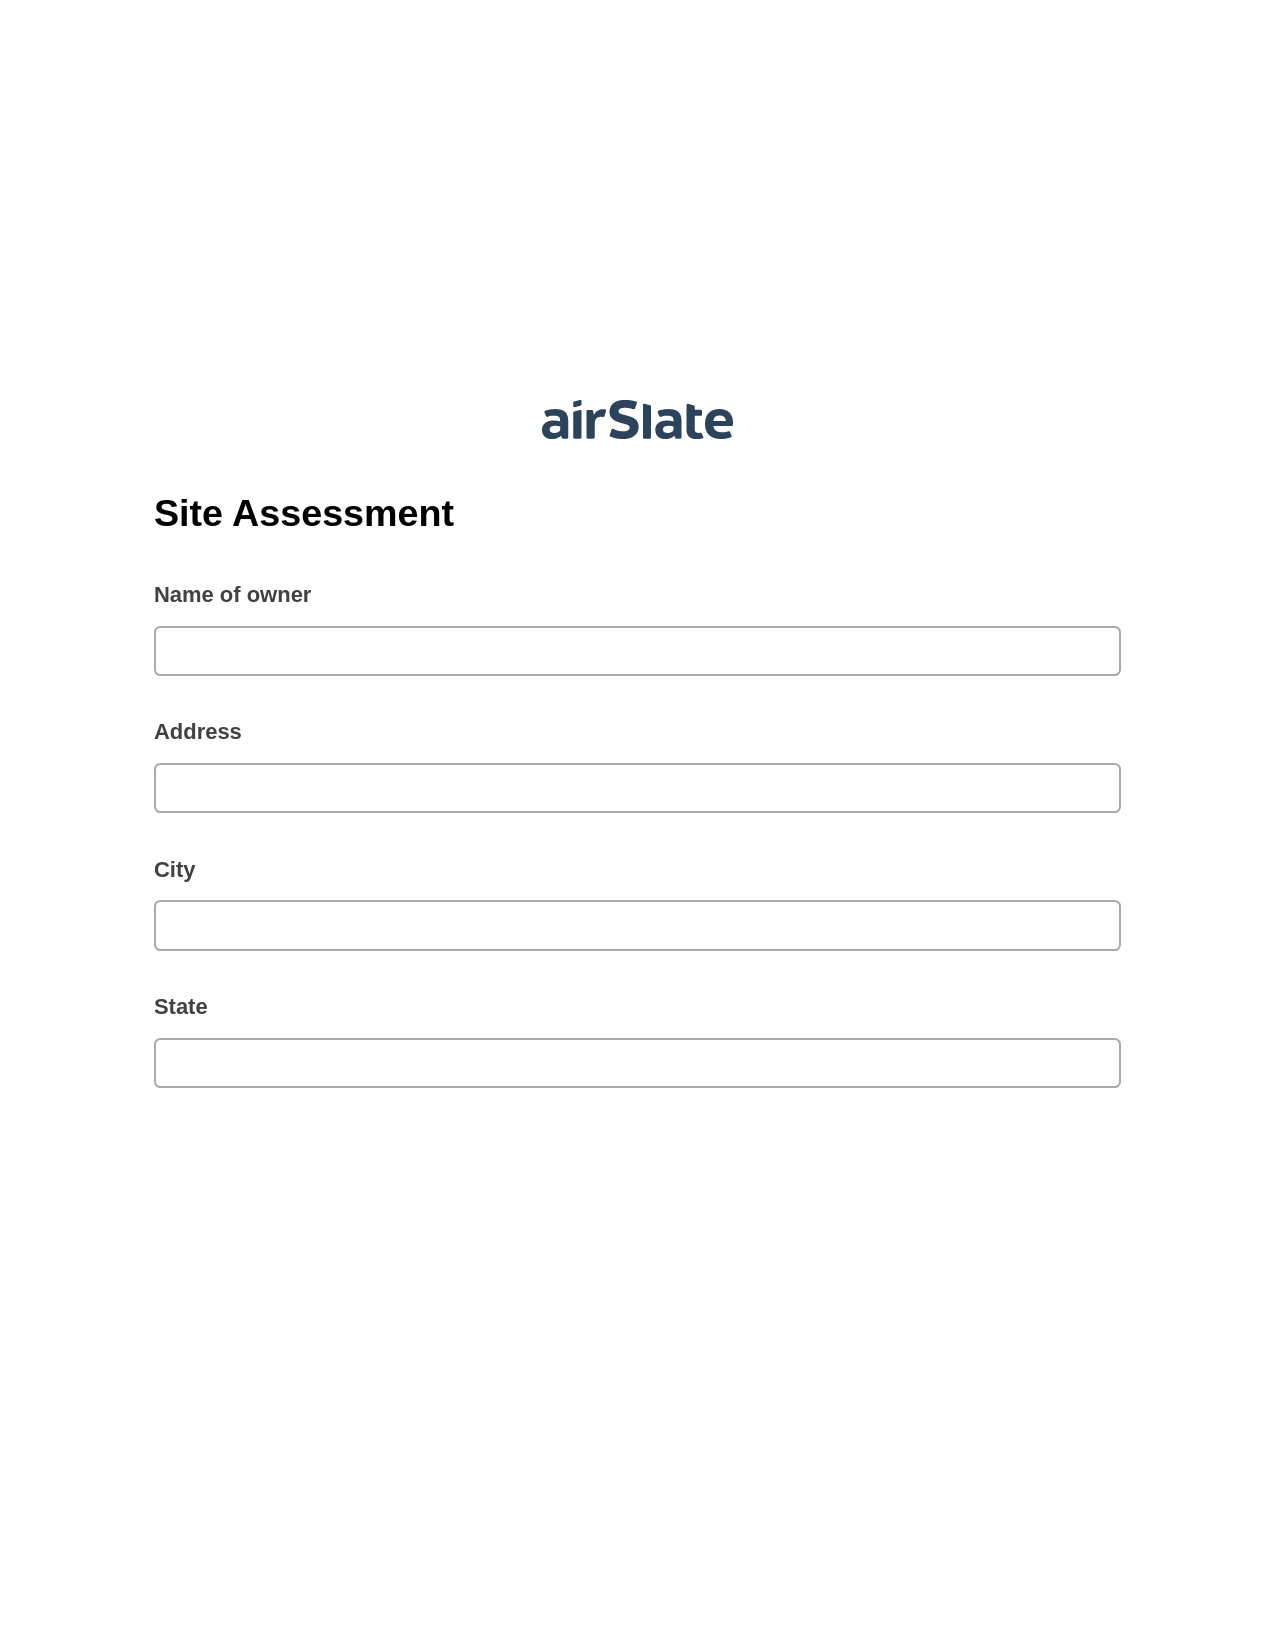 Site Assessment Pre-fill from CSV File Bot, Send a Slate with Roles Bot, Email Notification Postfinish Bot